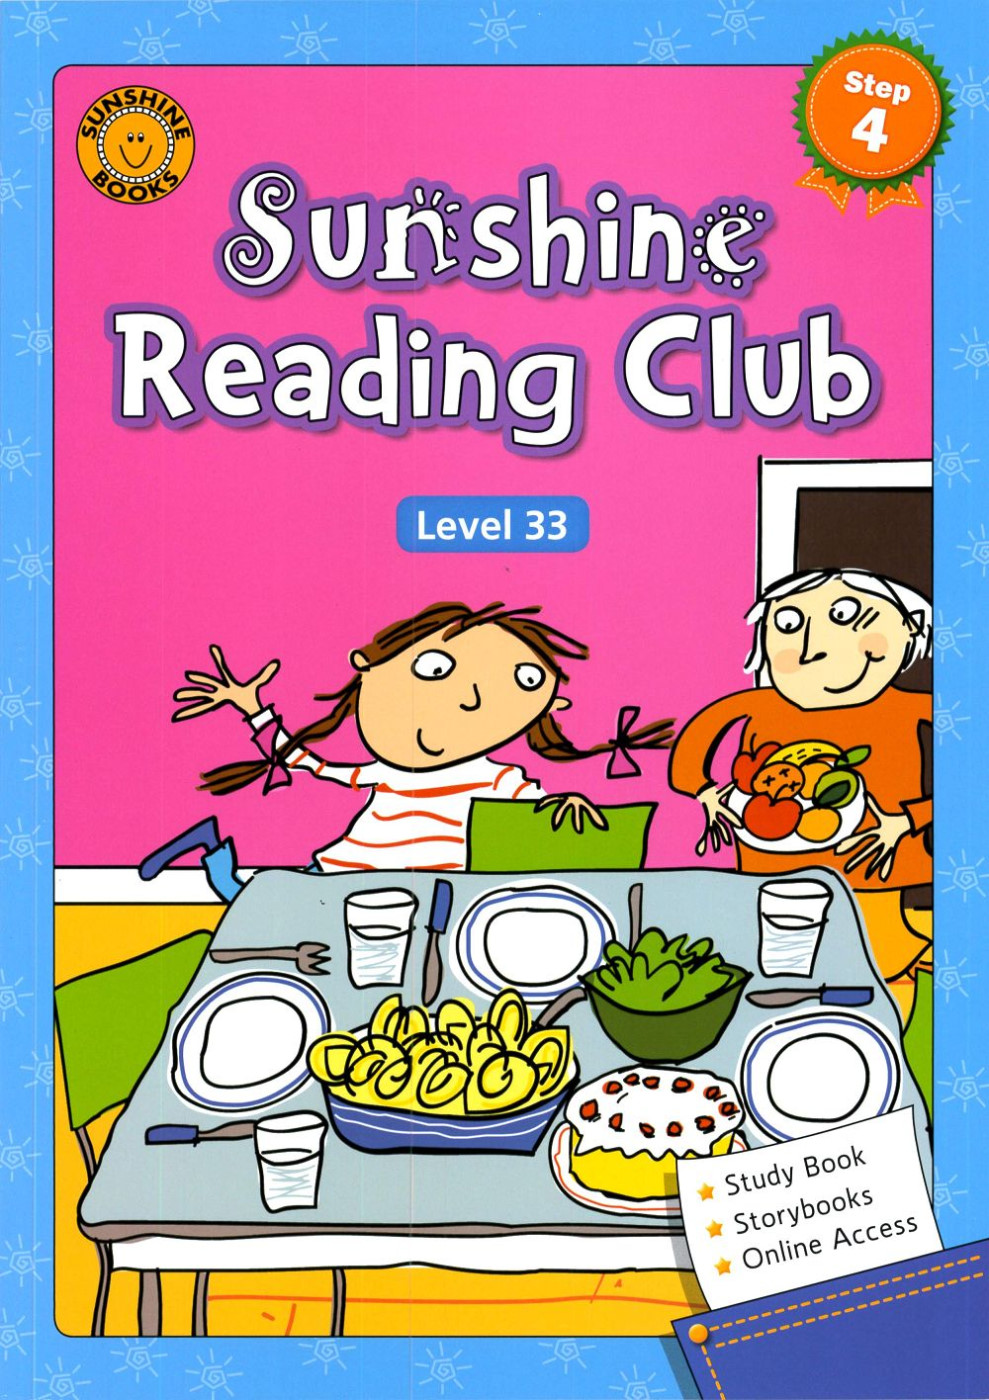 Sunshine Reading Club Level 33 Study Book with Storybooks and Online Access Code